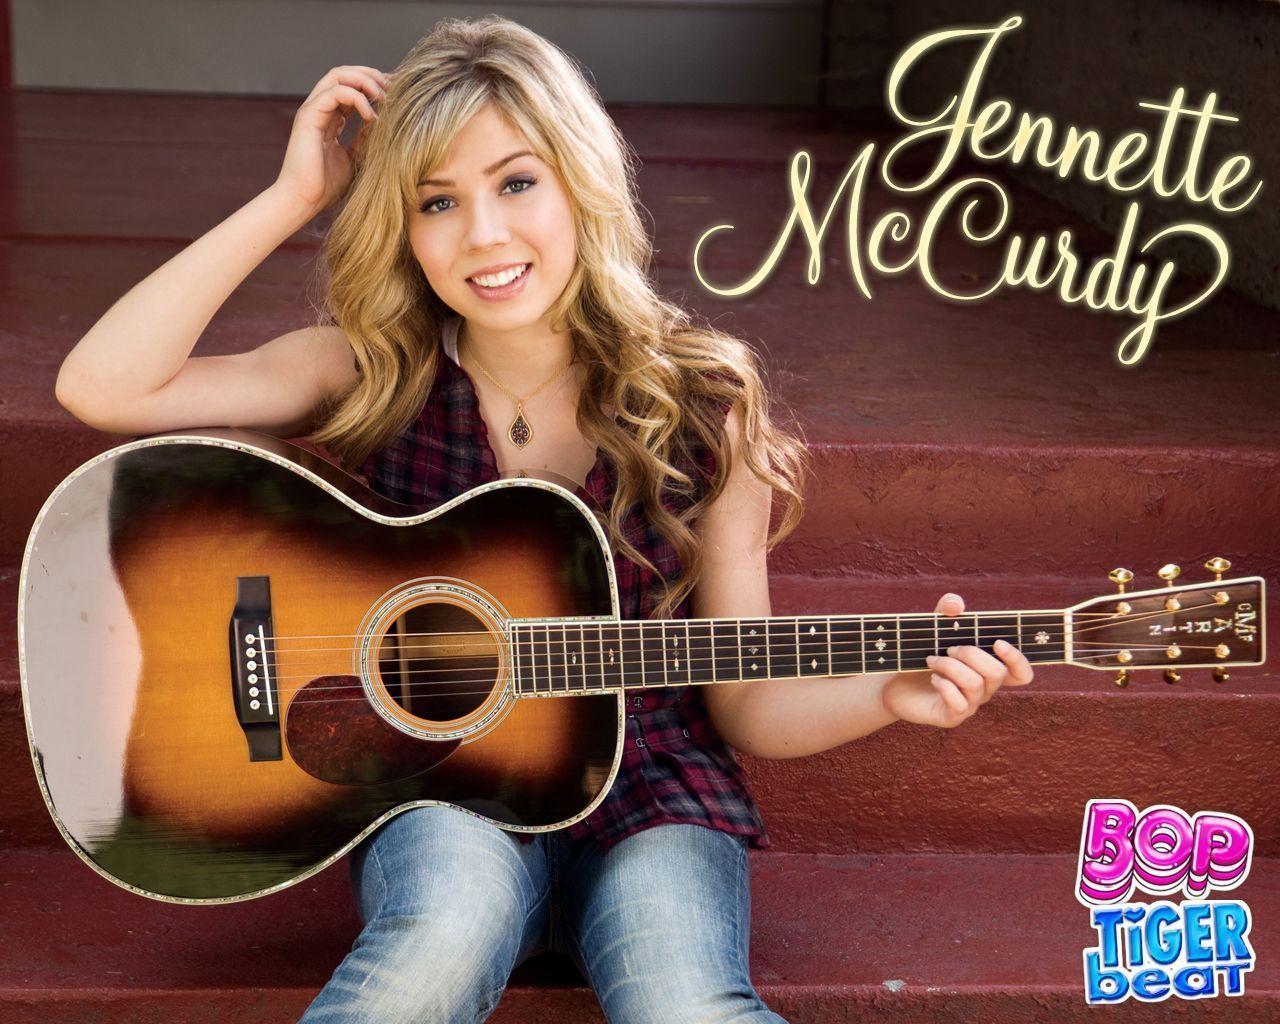 Countdown to the Holidays with Jennette McCurdy. BOP and Tiger